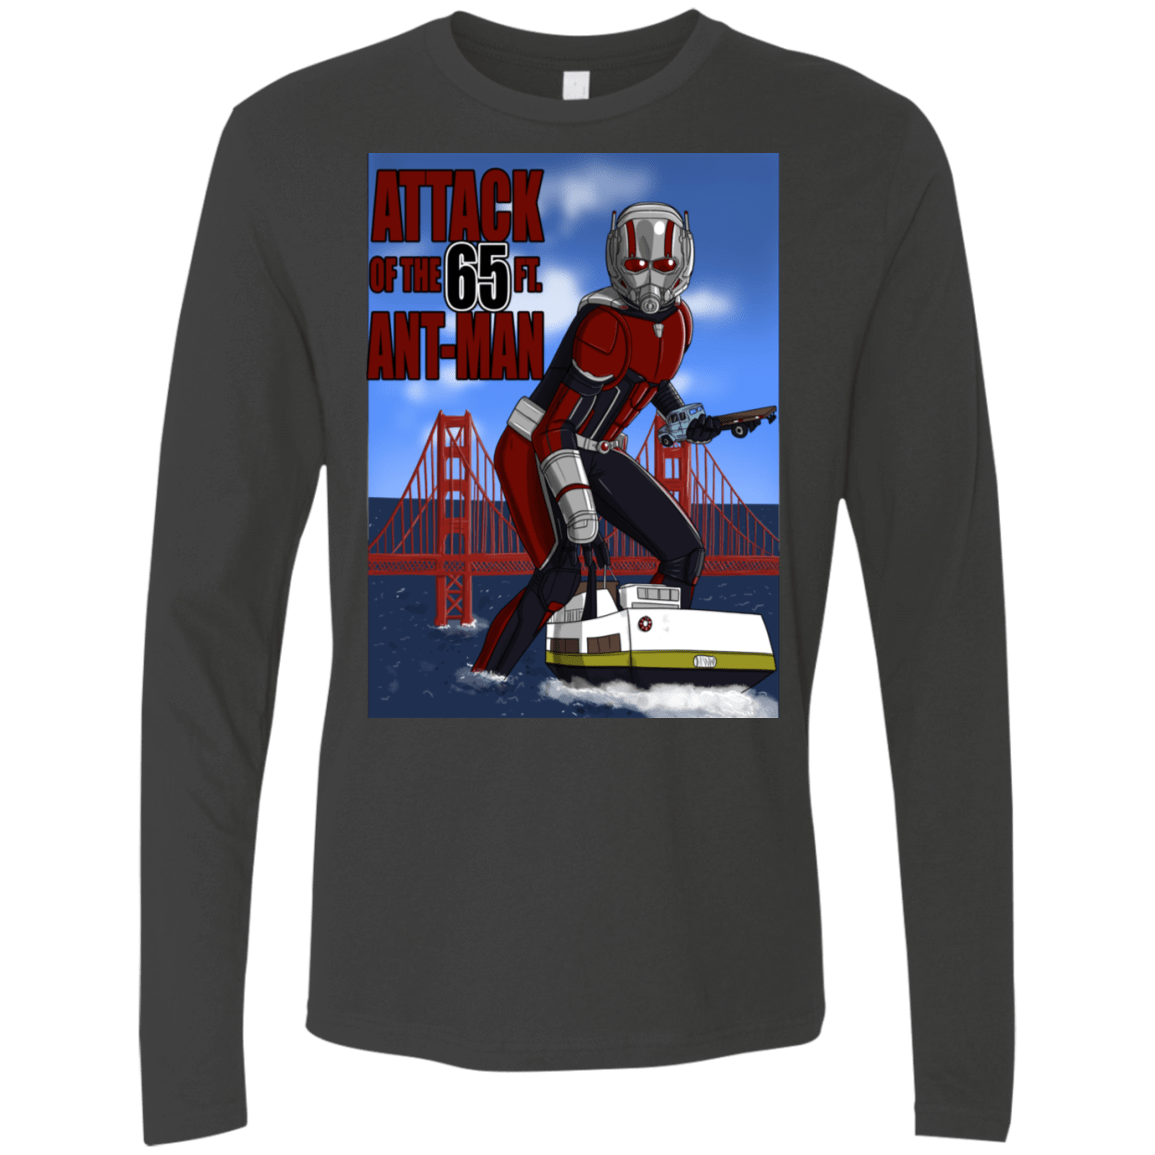 T-Shirts Heavy Metal / S Attack of the 65 ft. Ant-Man Men's Premium Long Sleeve